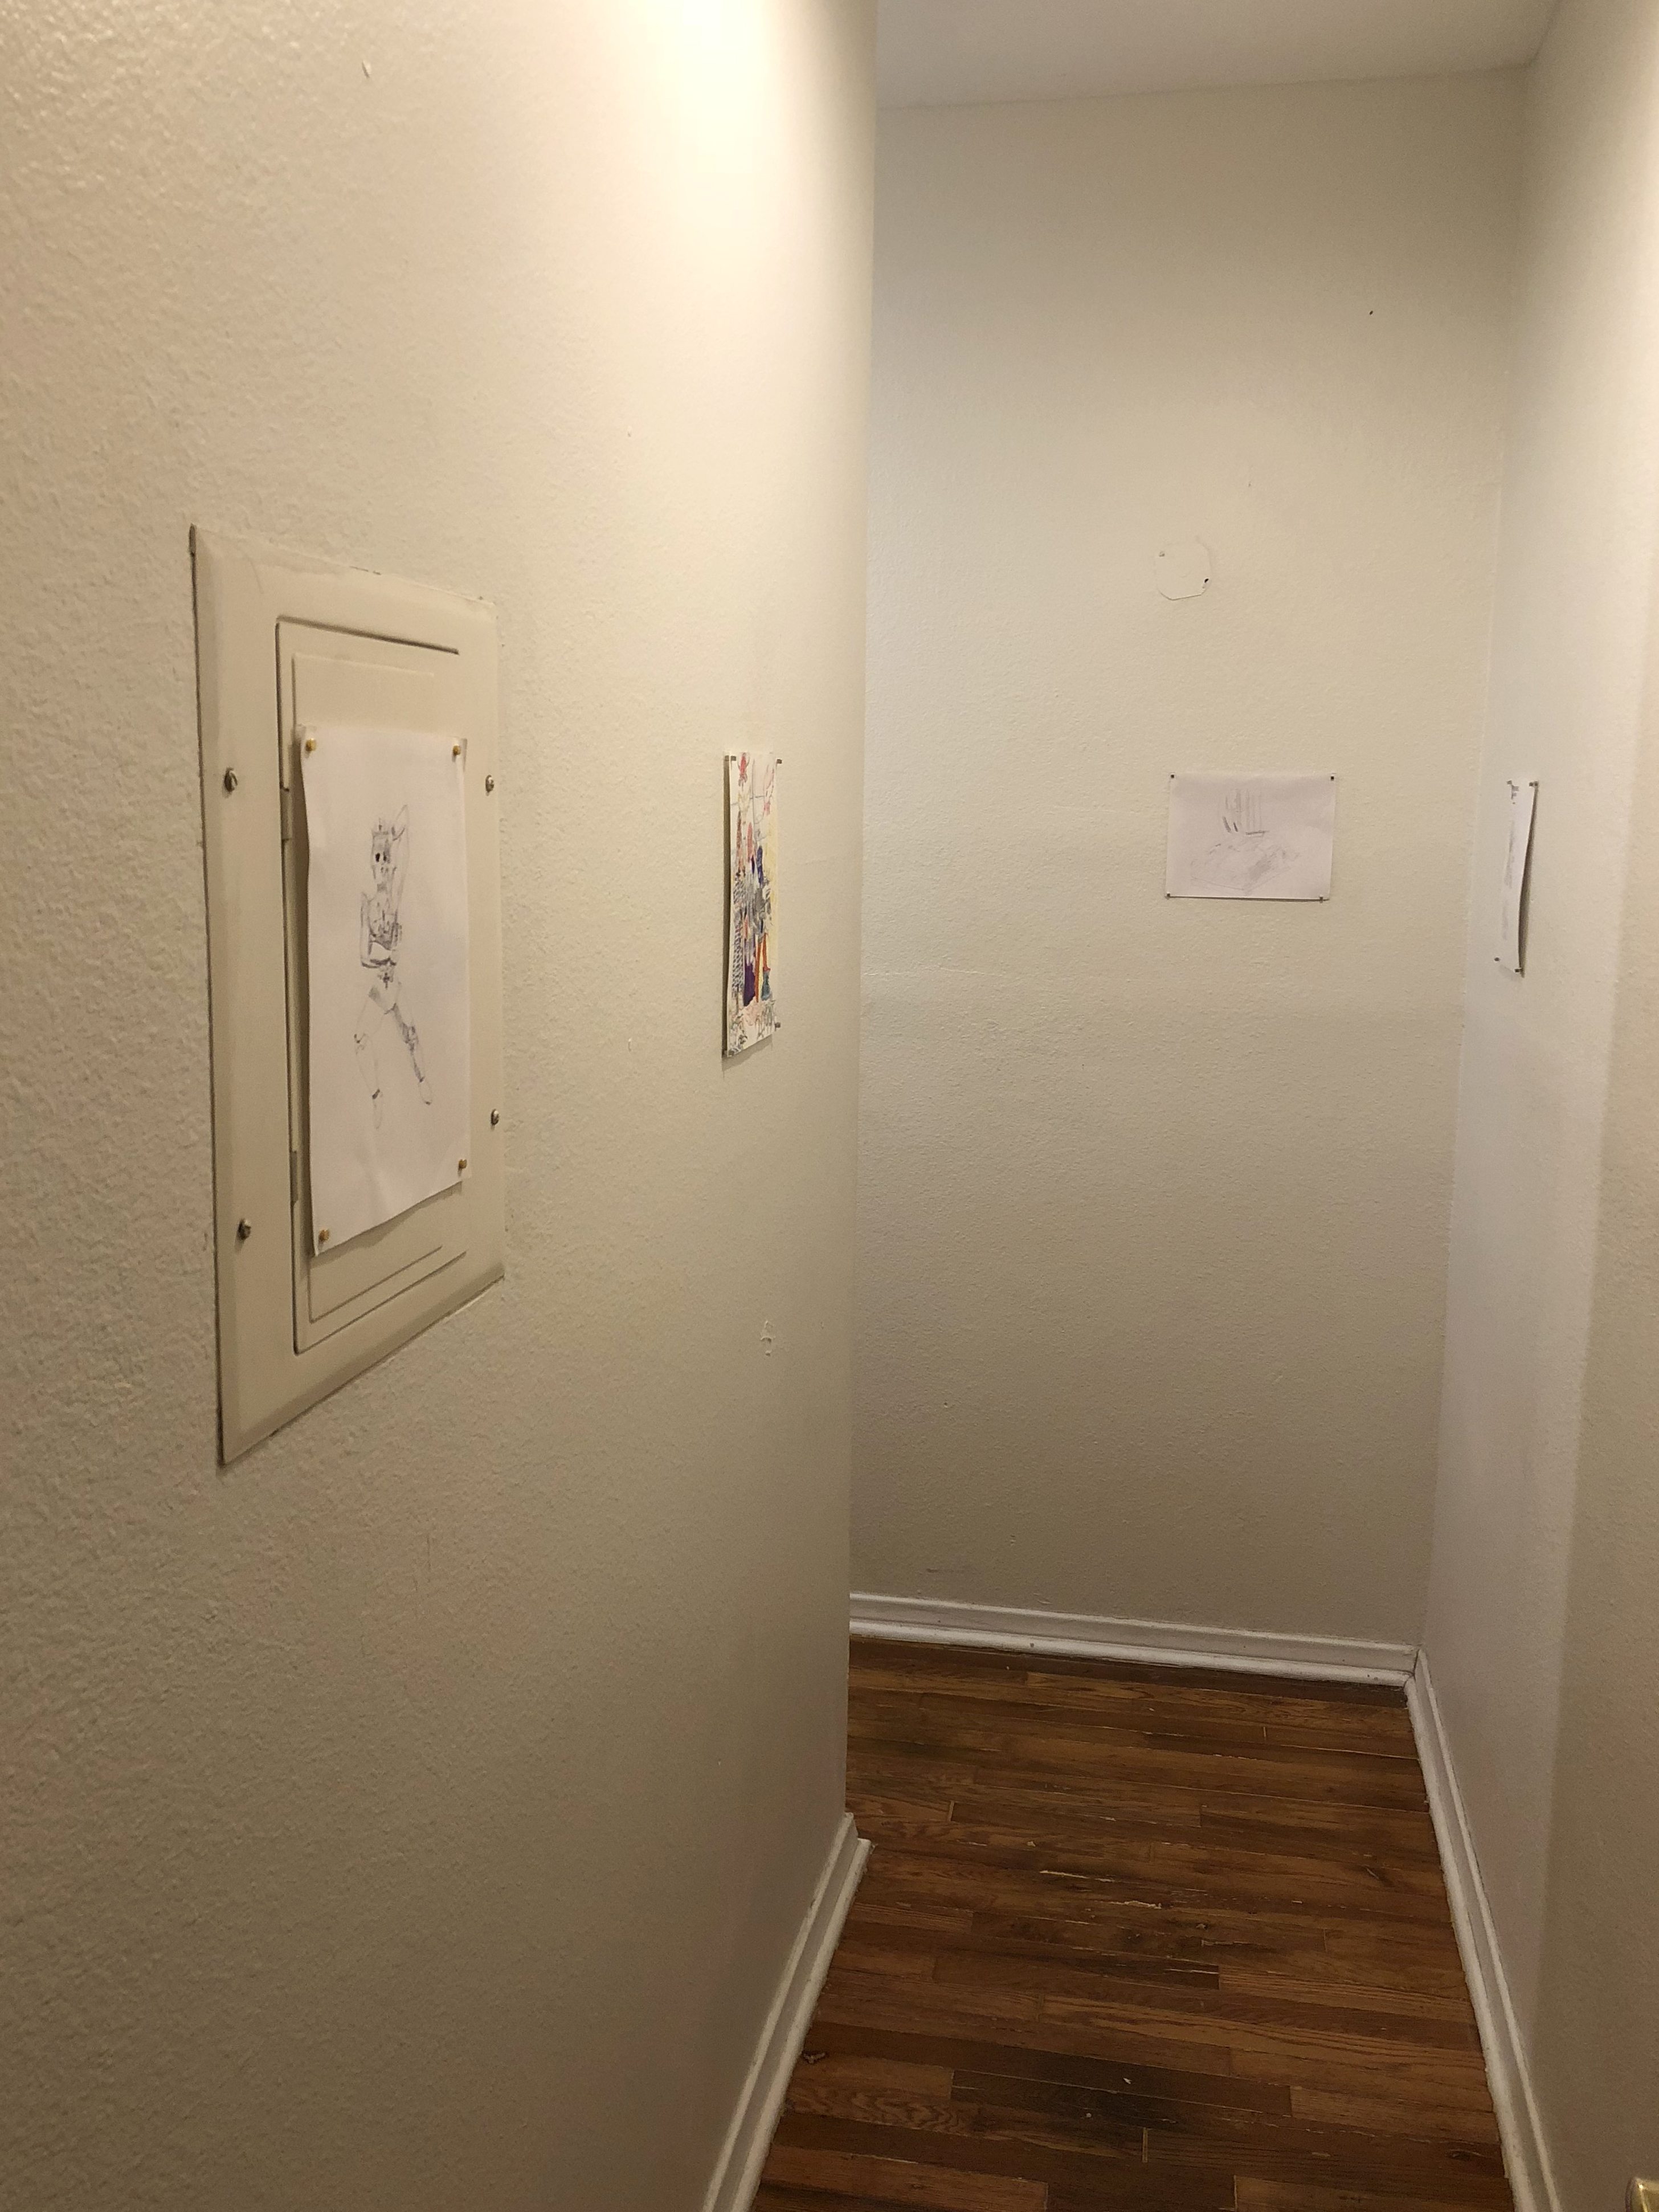 Four drawings on paper hung in a narrow white hallway